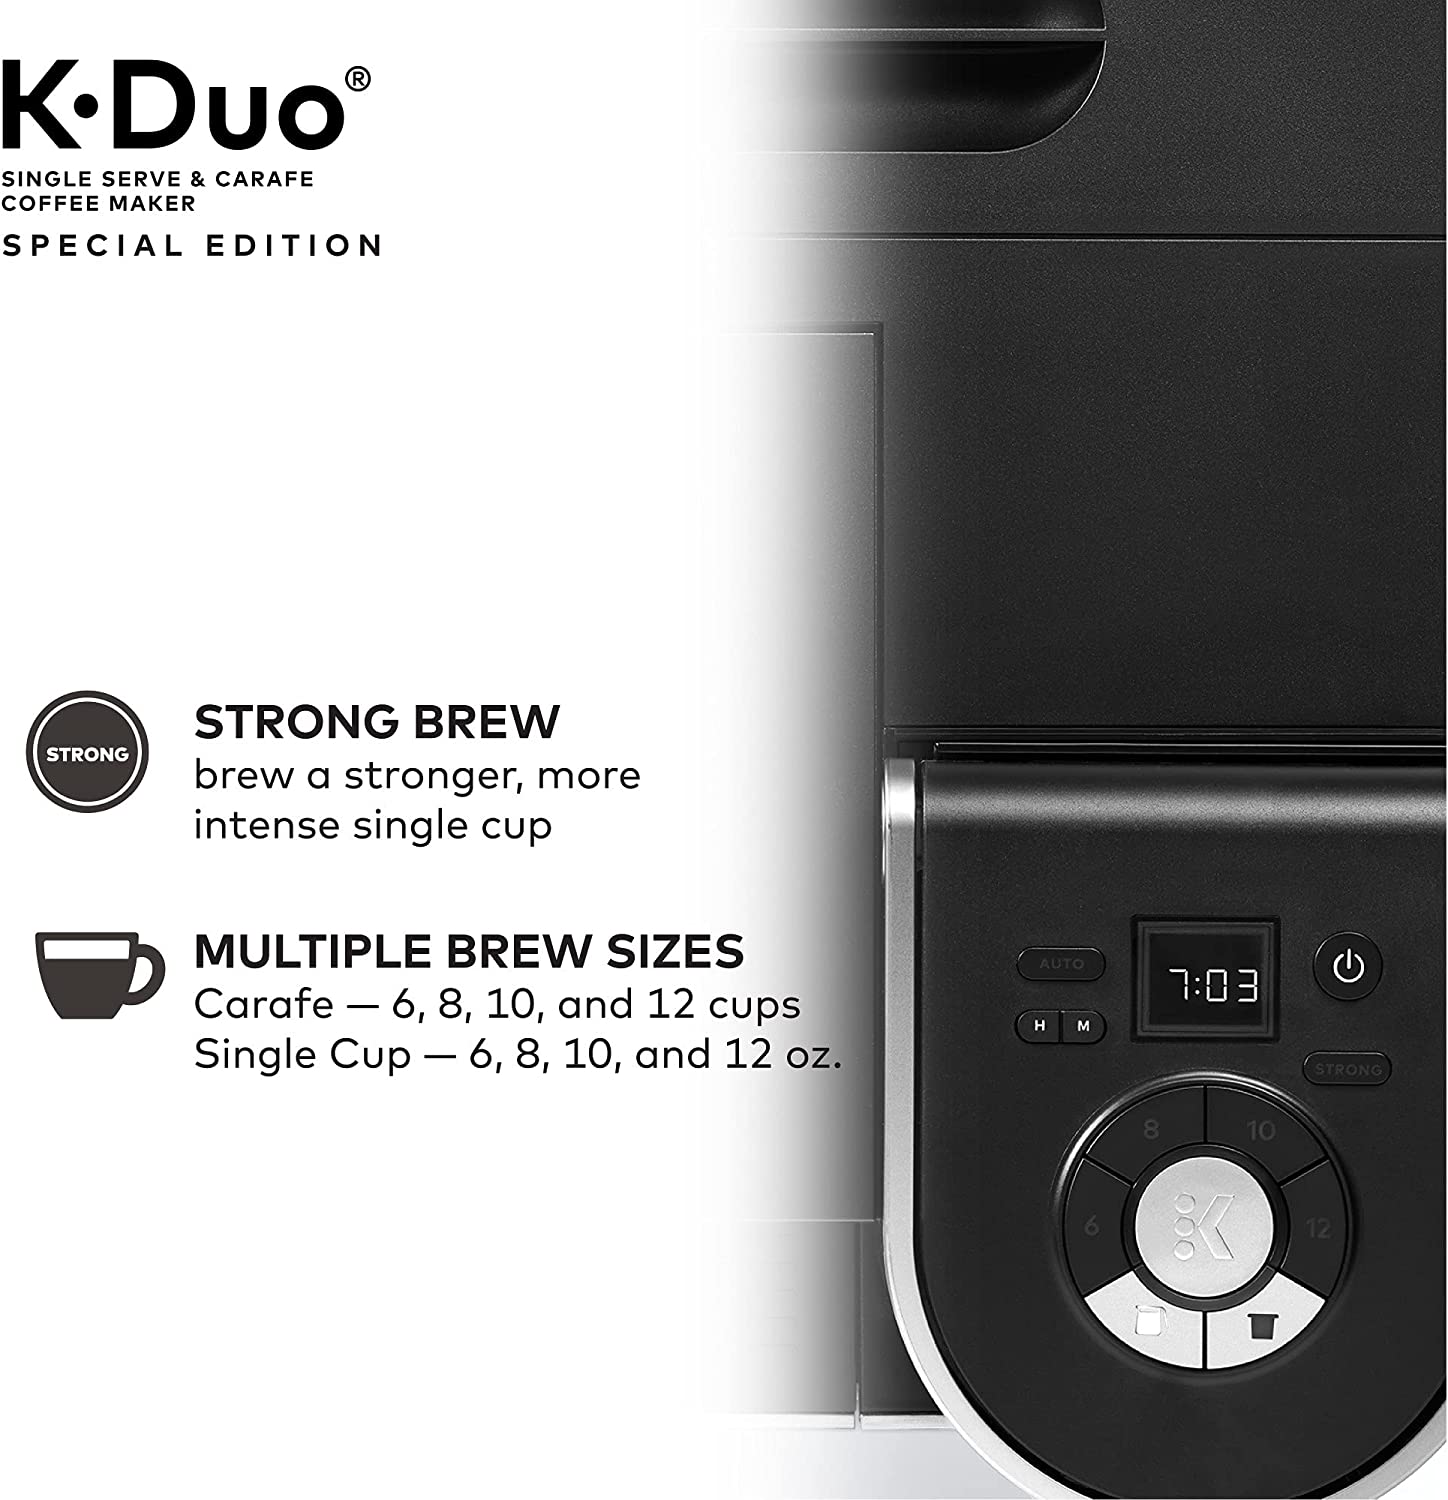 Keurig K Duo Special Edition Single Serve K-Cup Pod Coffee Maker Black  Brand New